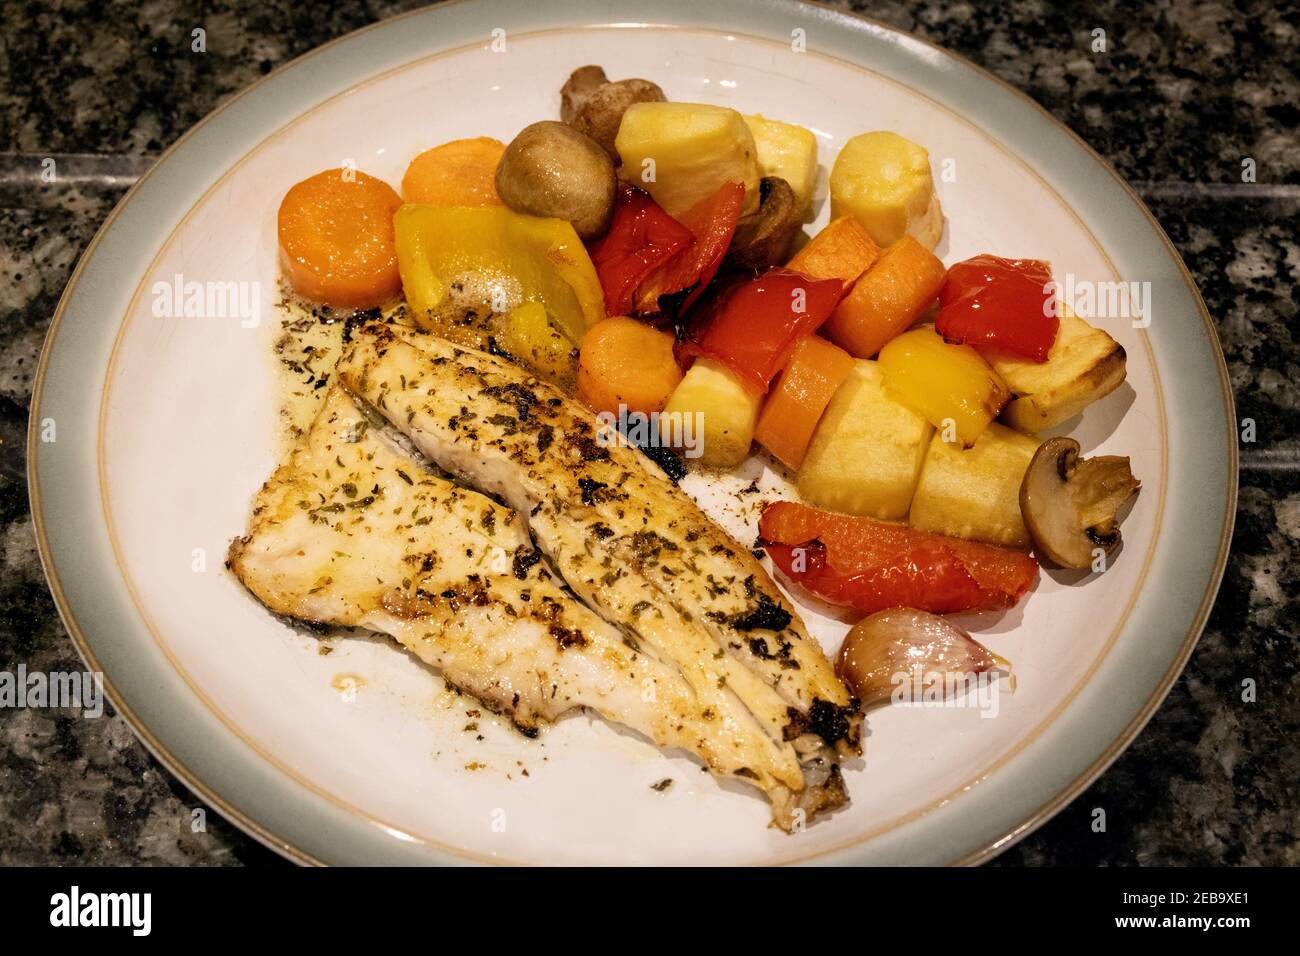 Sea Bass cooked with roasted vegetables on a plate, healthy diet; Sea Bass meal with roast peppers, carrots, parsnips, mushrooms and garlic; UK Stock Photo